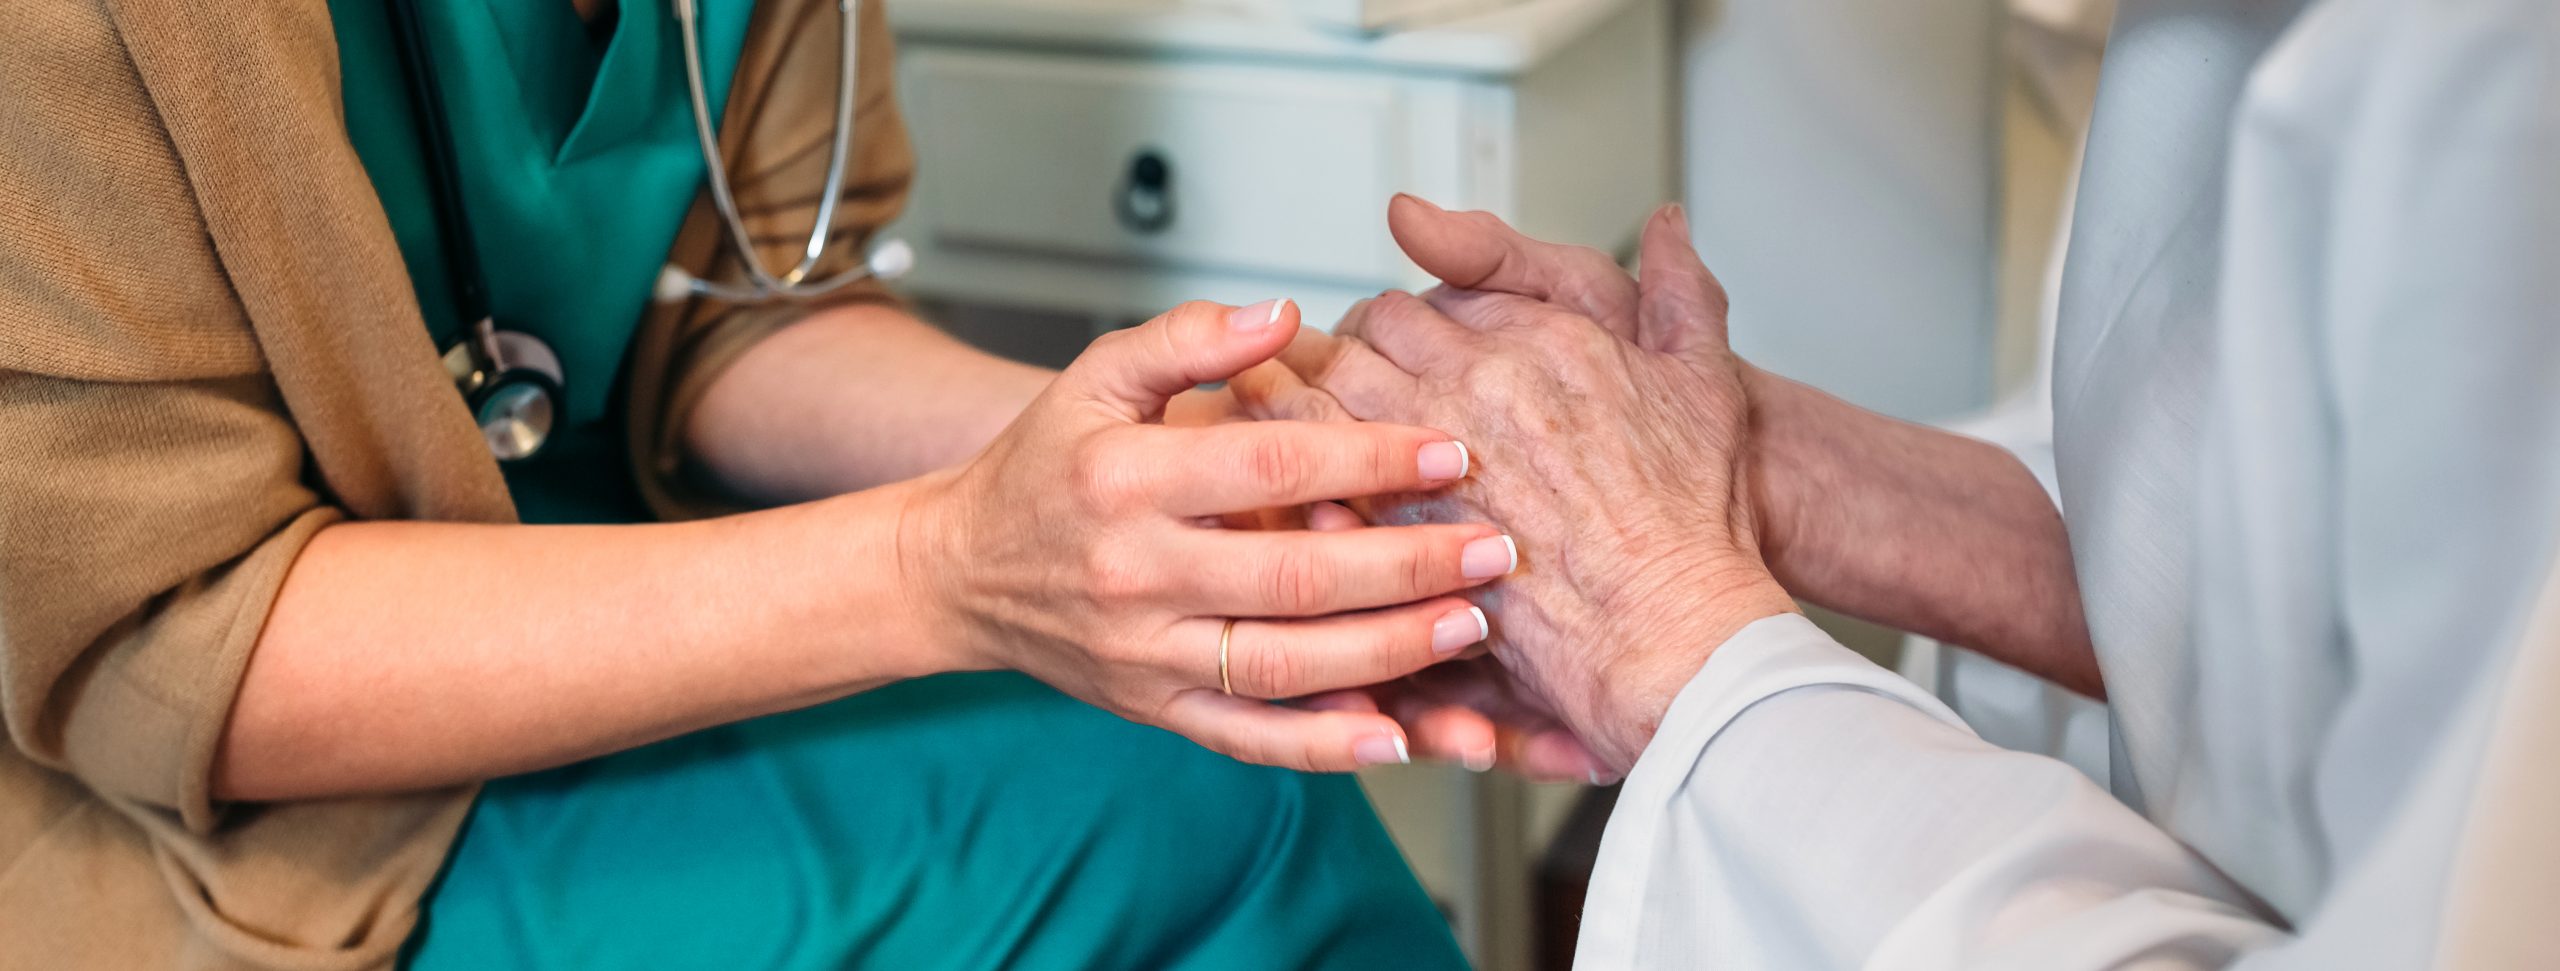 Female nurse giving encouragement to elderly patient by holding her hands